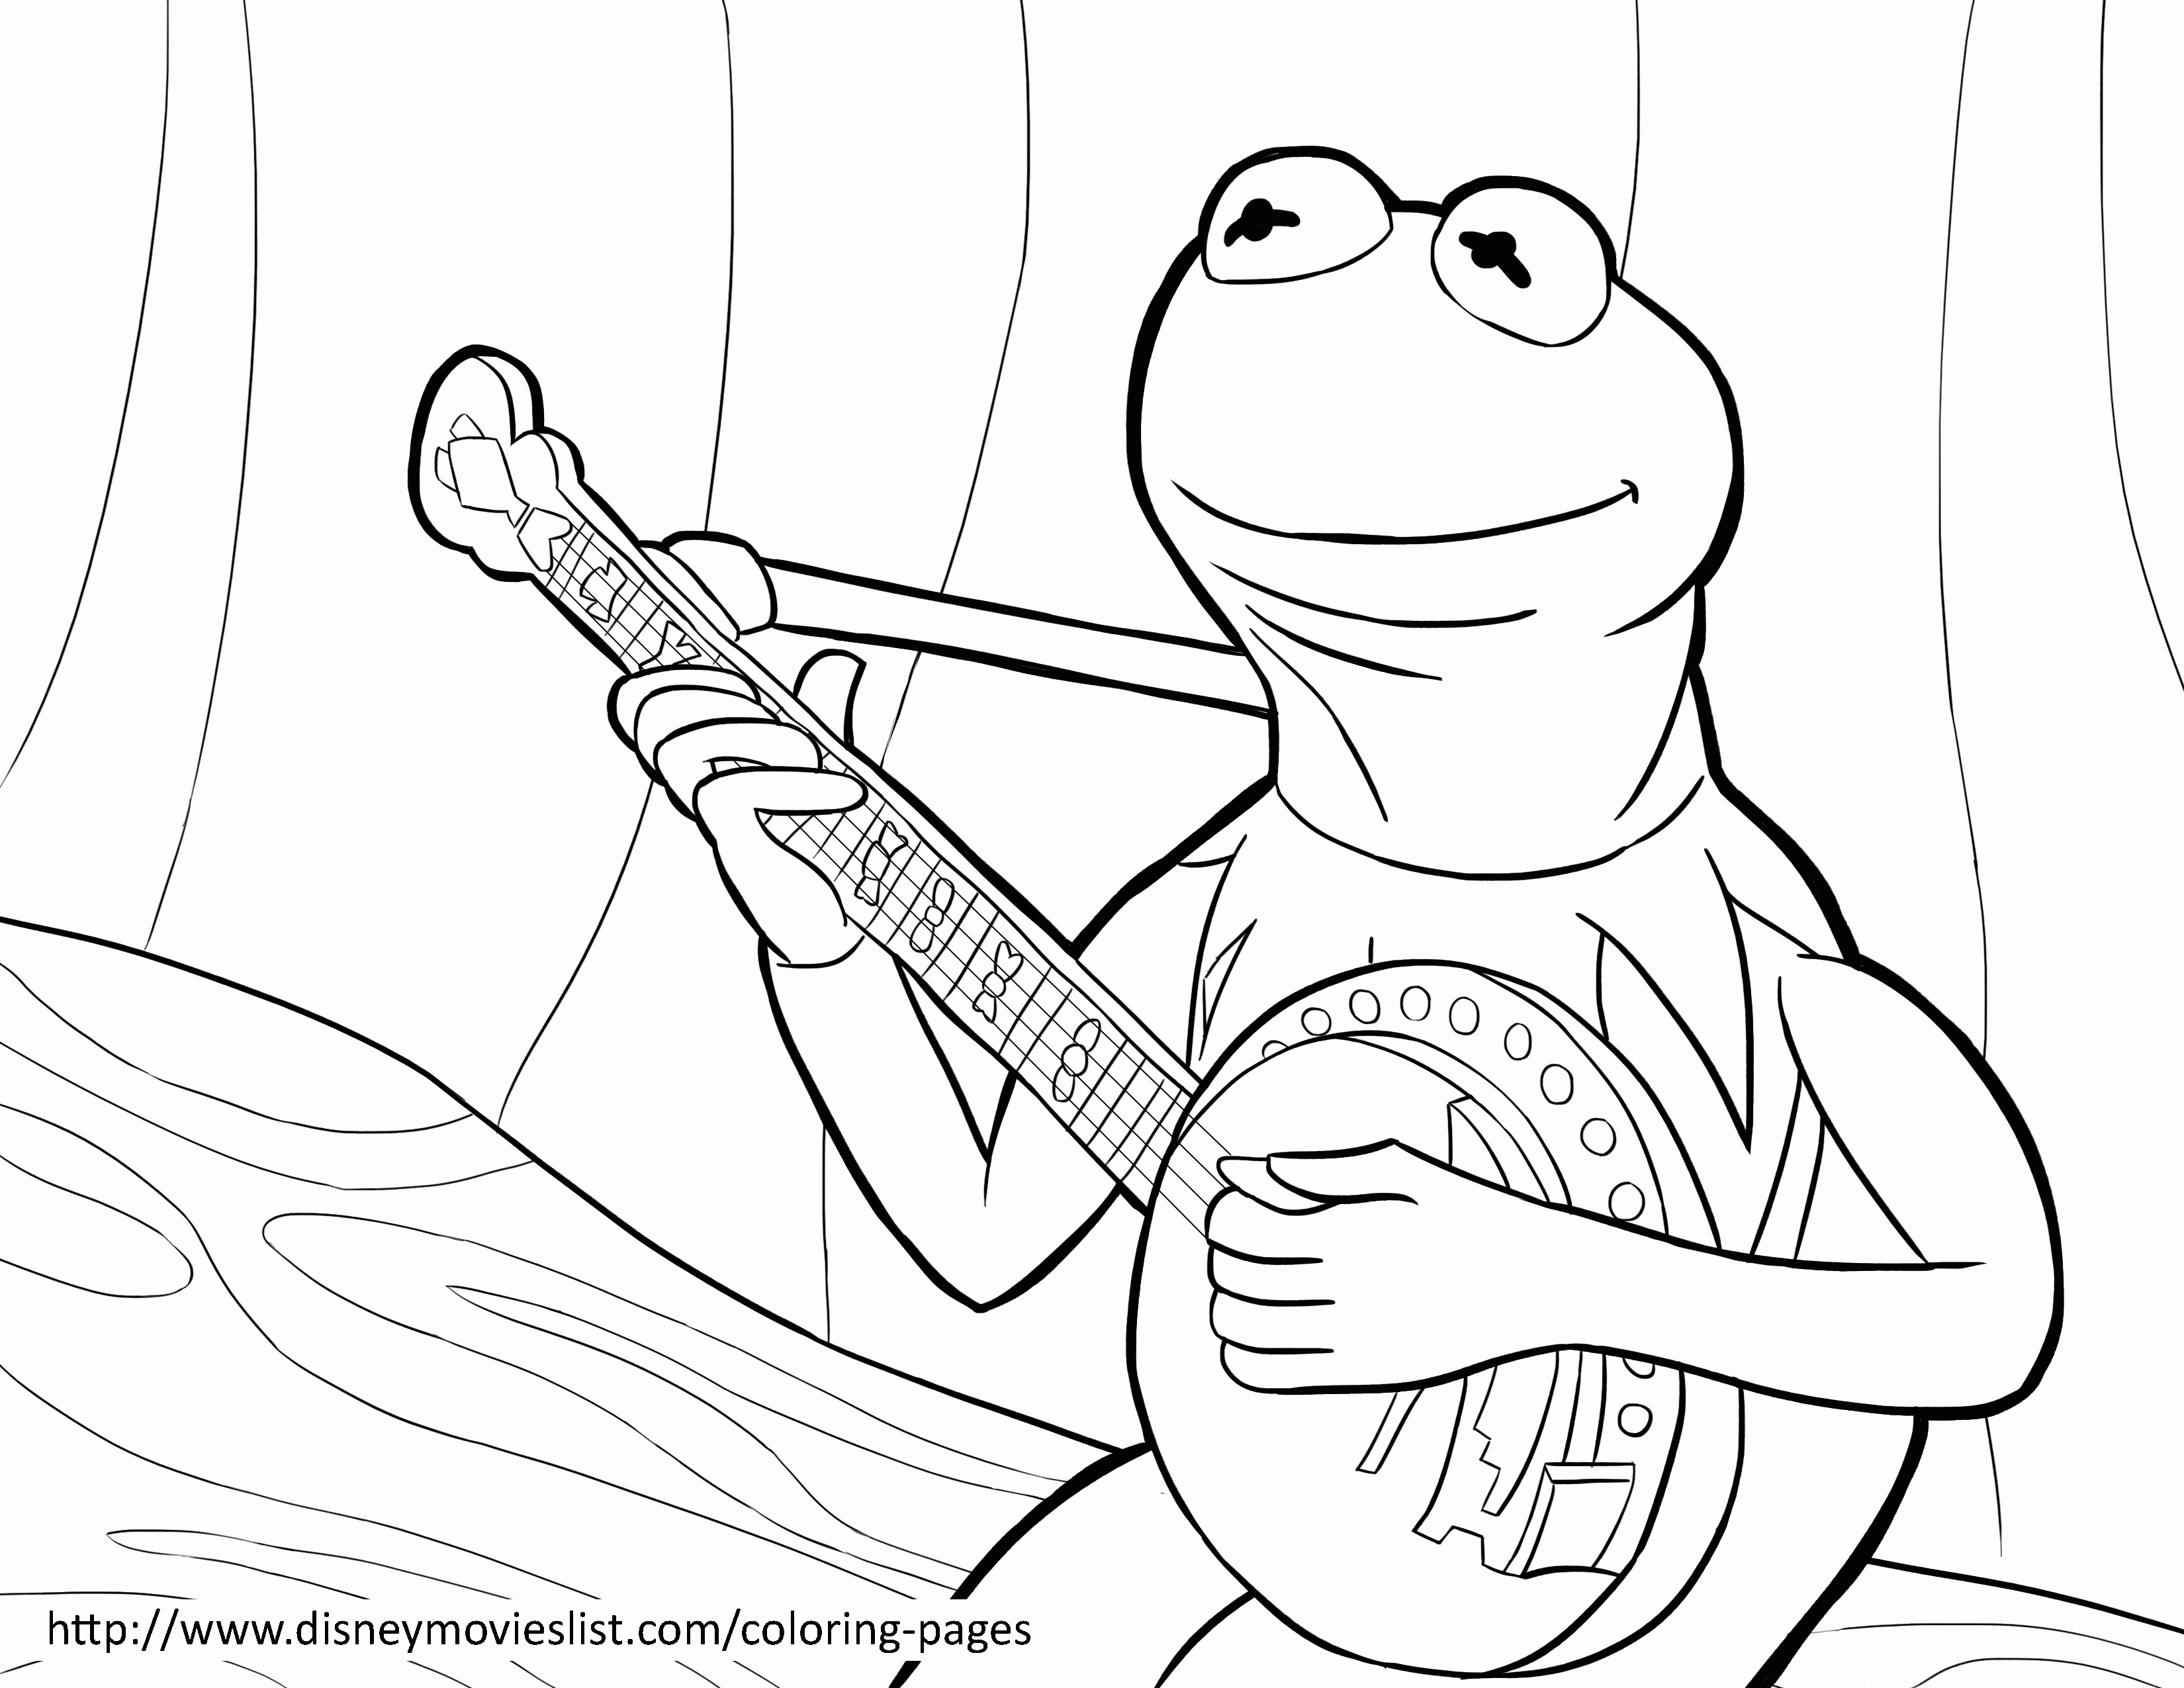 Free kermit the frog coloring pages download free kermit the frog coloring pages png images free cliparts on clipart library